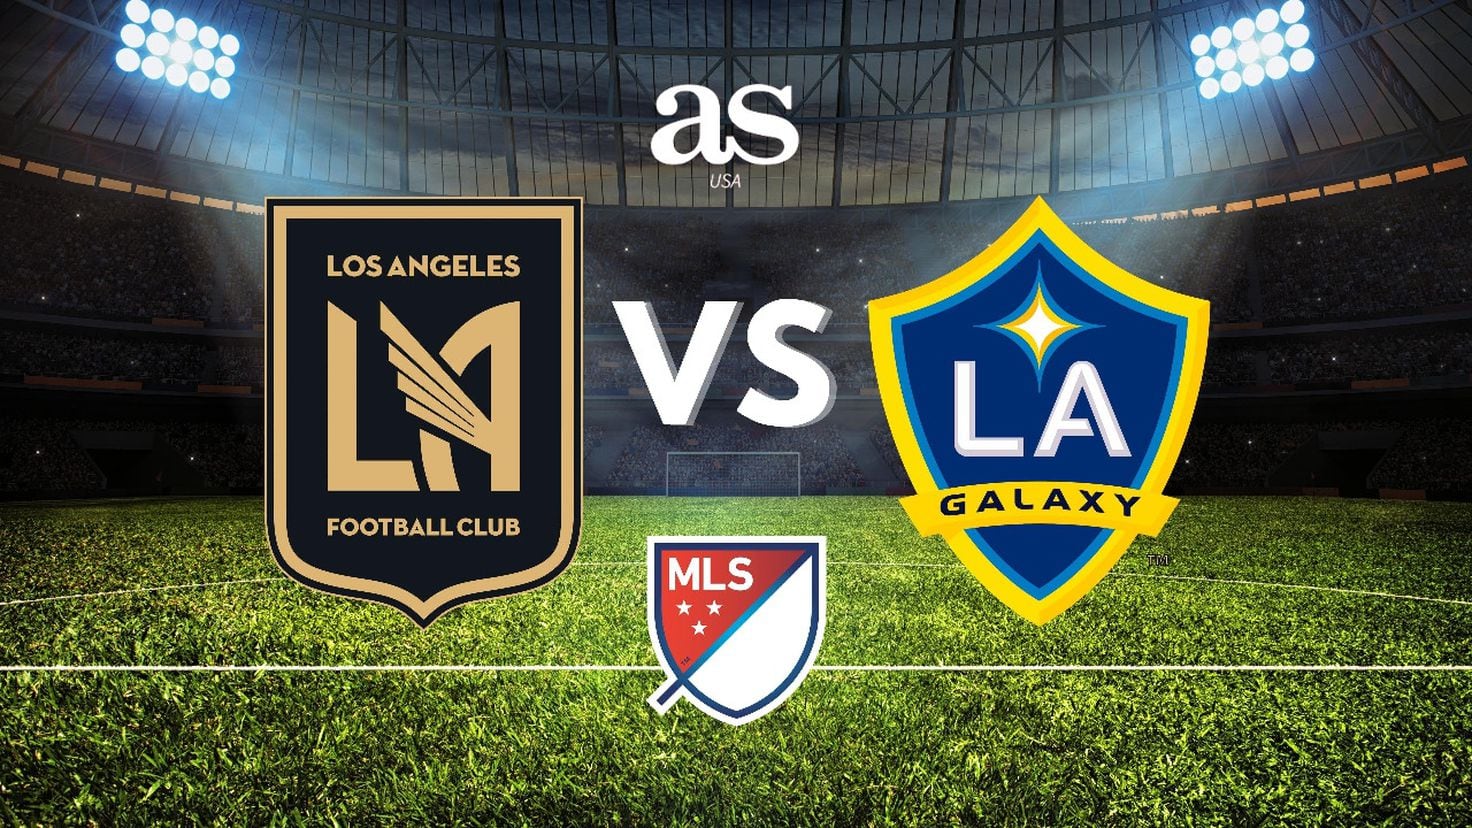 The Los Angeles Football Club #LAFC begins its third campaign in